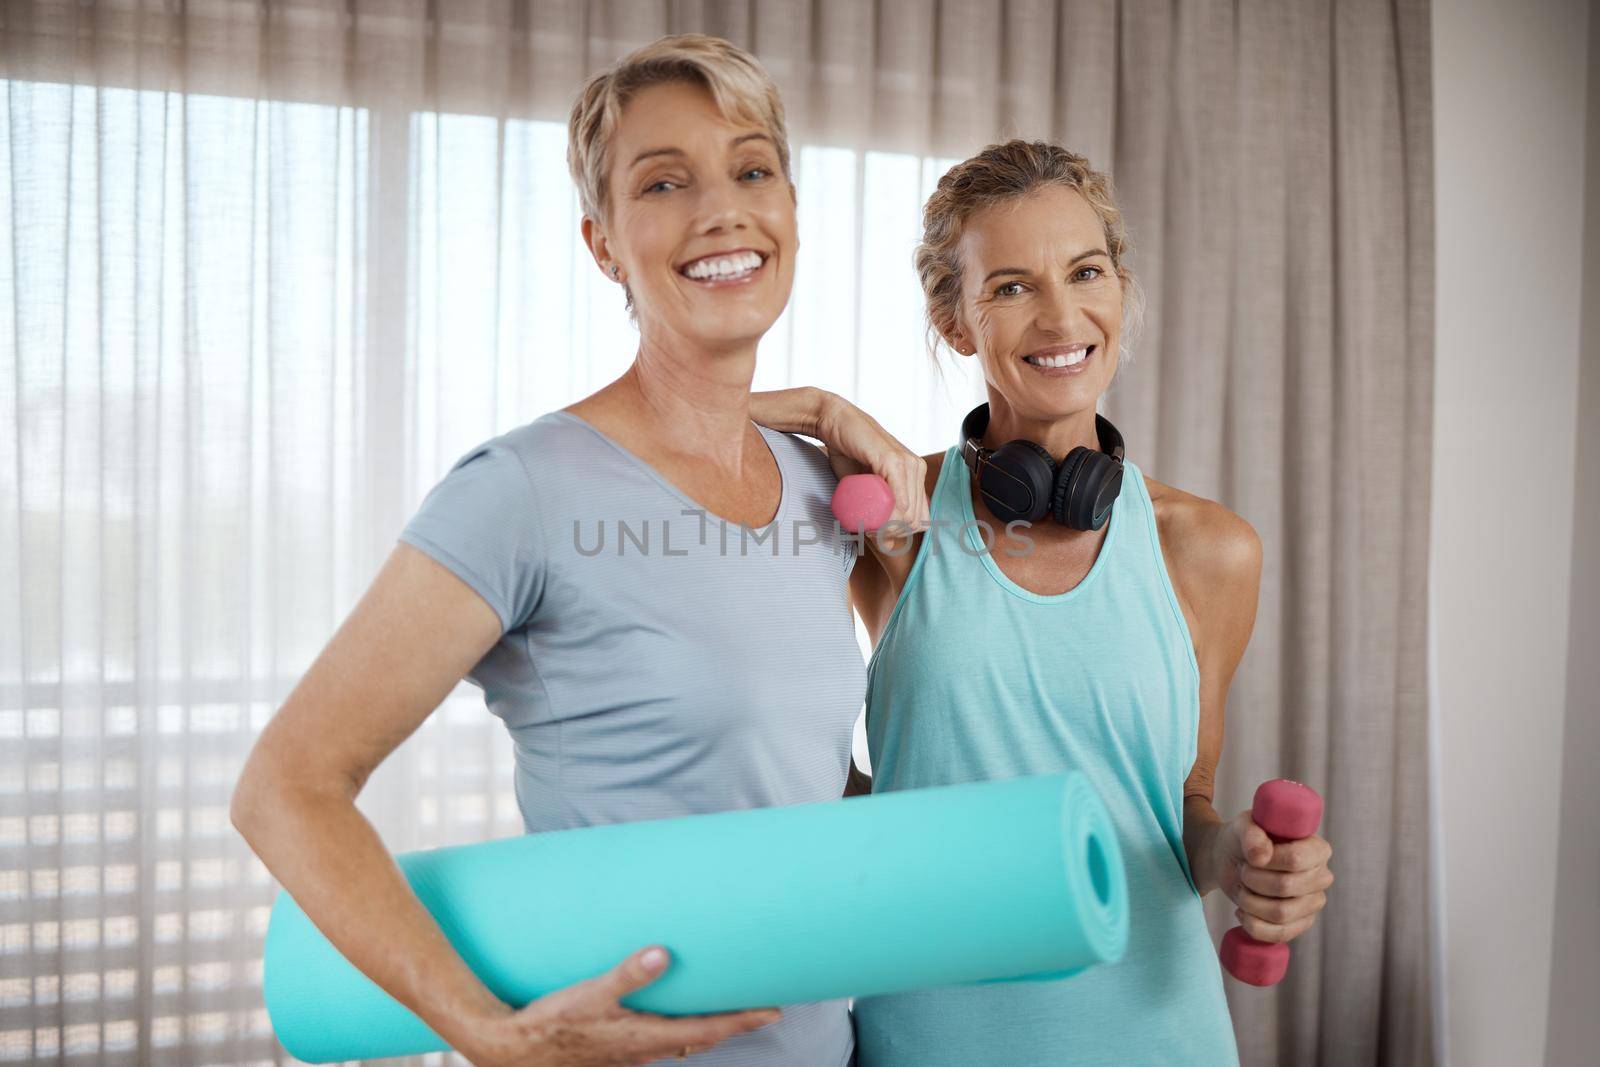 Surrounded by those who just do better. Portrait of two mature women getting ready for their workout at home